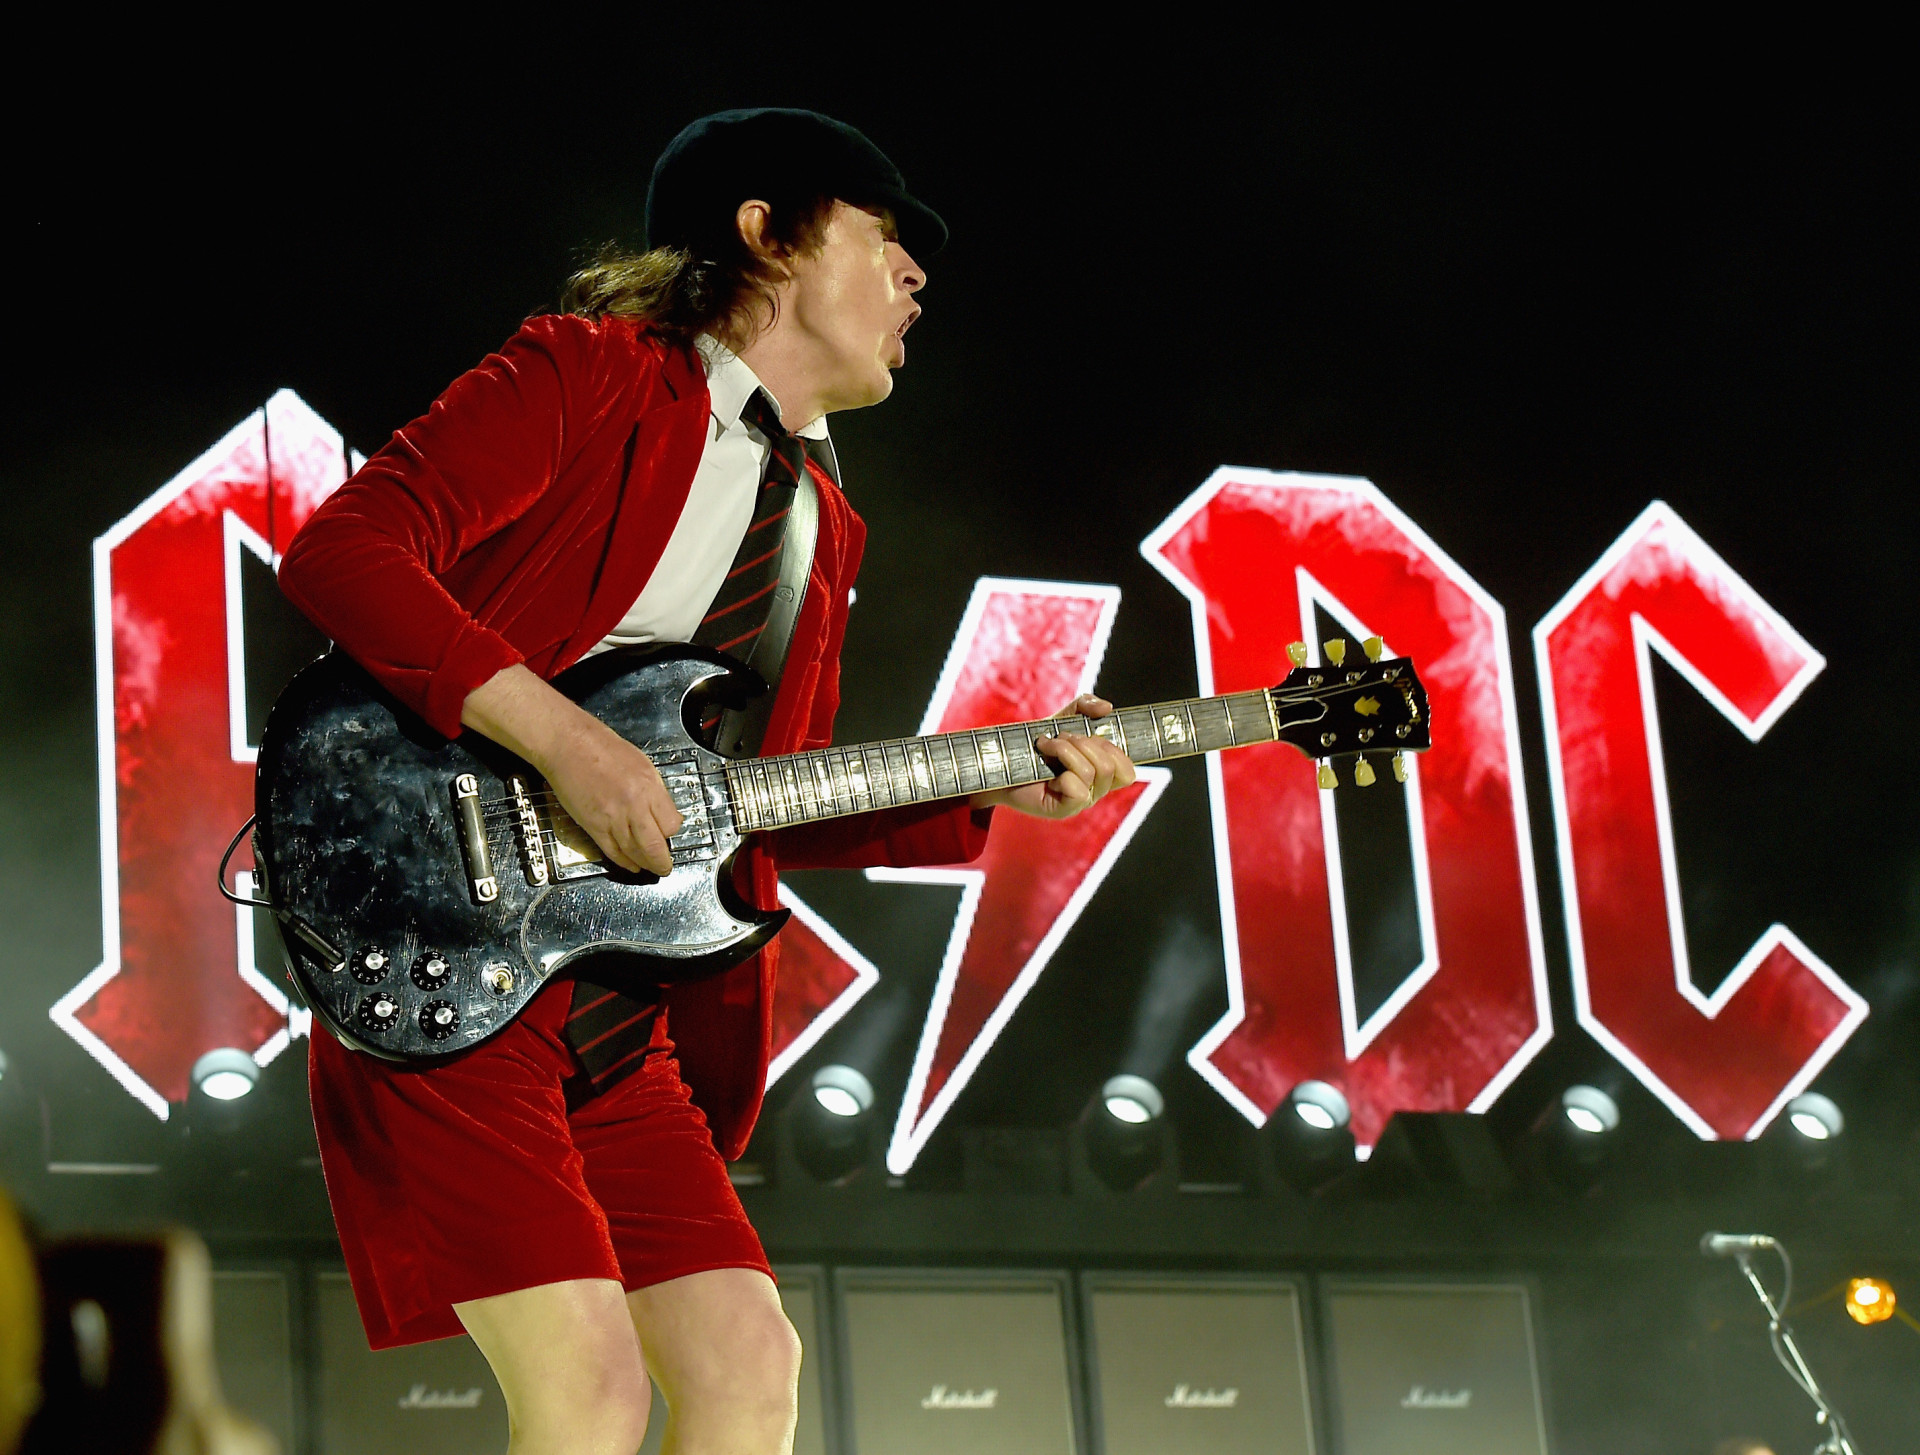 <p>Very few adult men can rock a schoolboy's uniform the way Angus Young can. </p><p>You may also like:<a href="https://www.starsinsider.com/n/327172?utm_source=msn.com&utm_medium=display&utm_campaign=referral_description&utm_content=624139en-ae"> "Italian" food that would make a real Italian cringe</a></p>